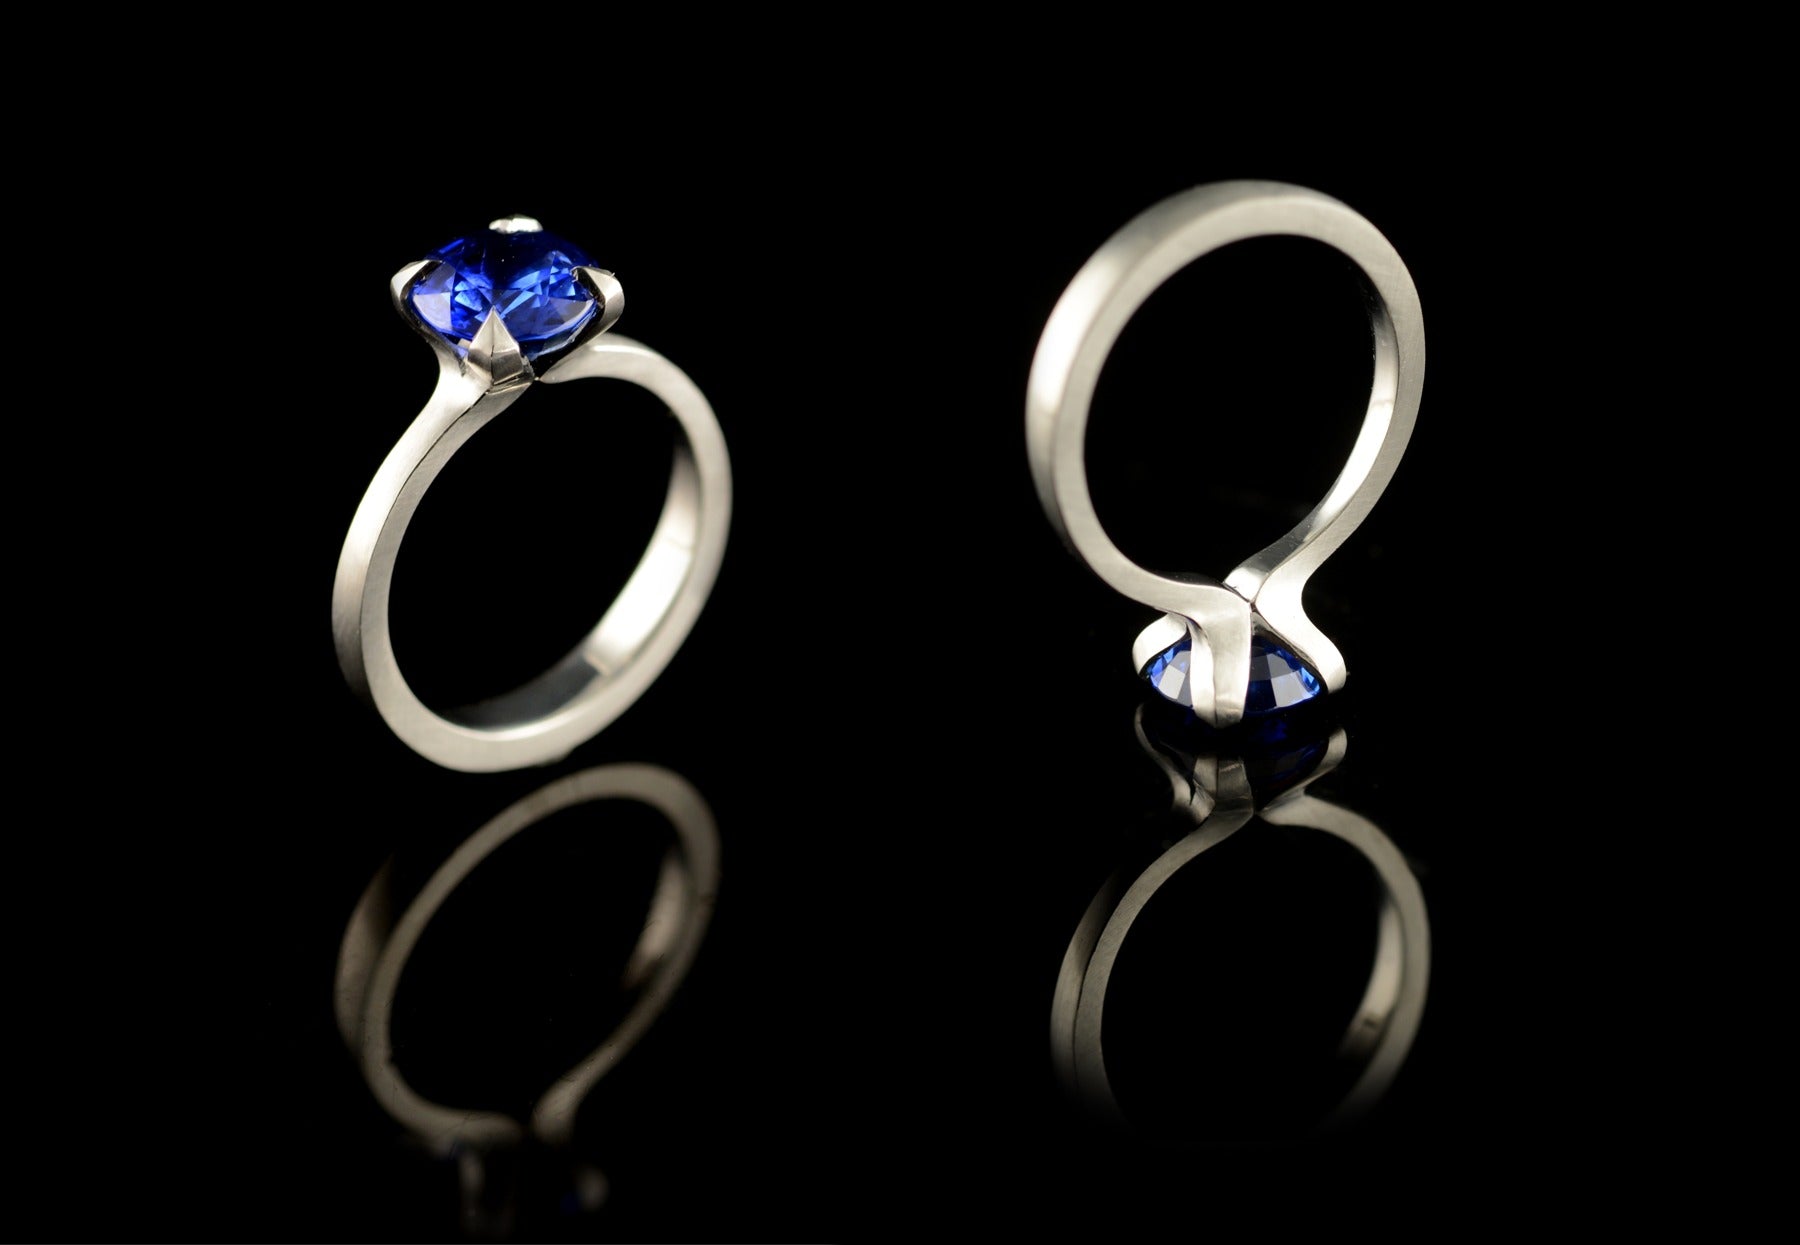 Platinum and blue sapphire ring with 4 pointed claws